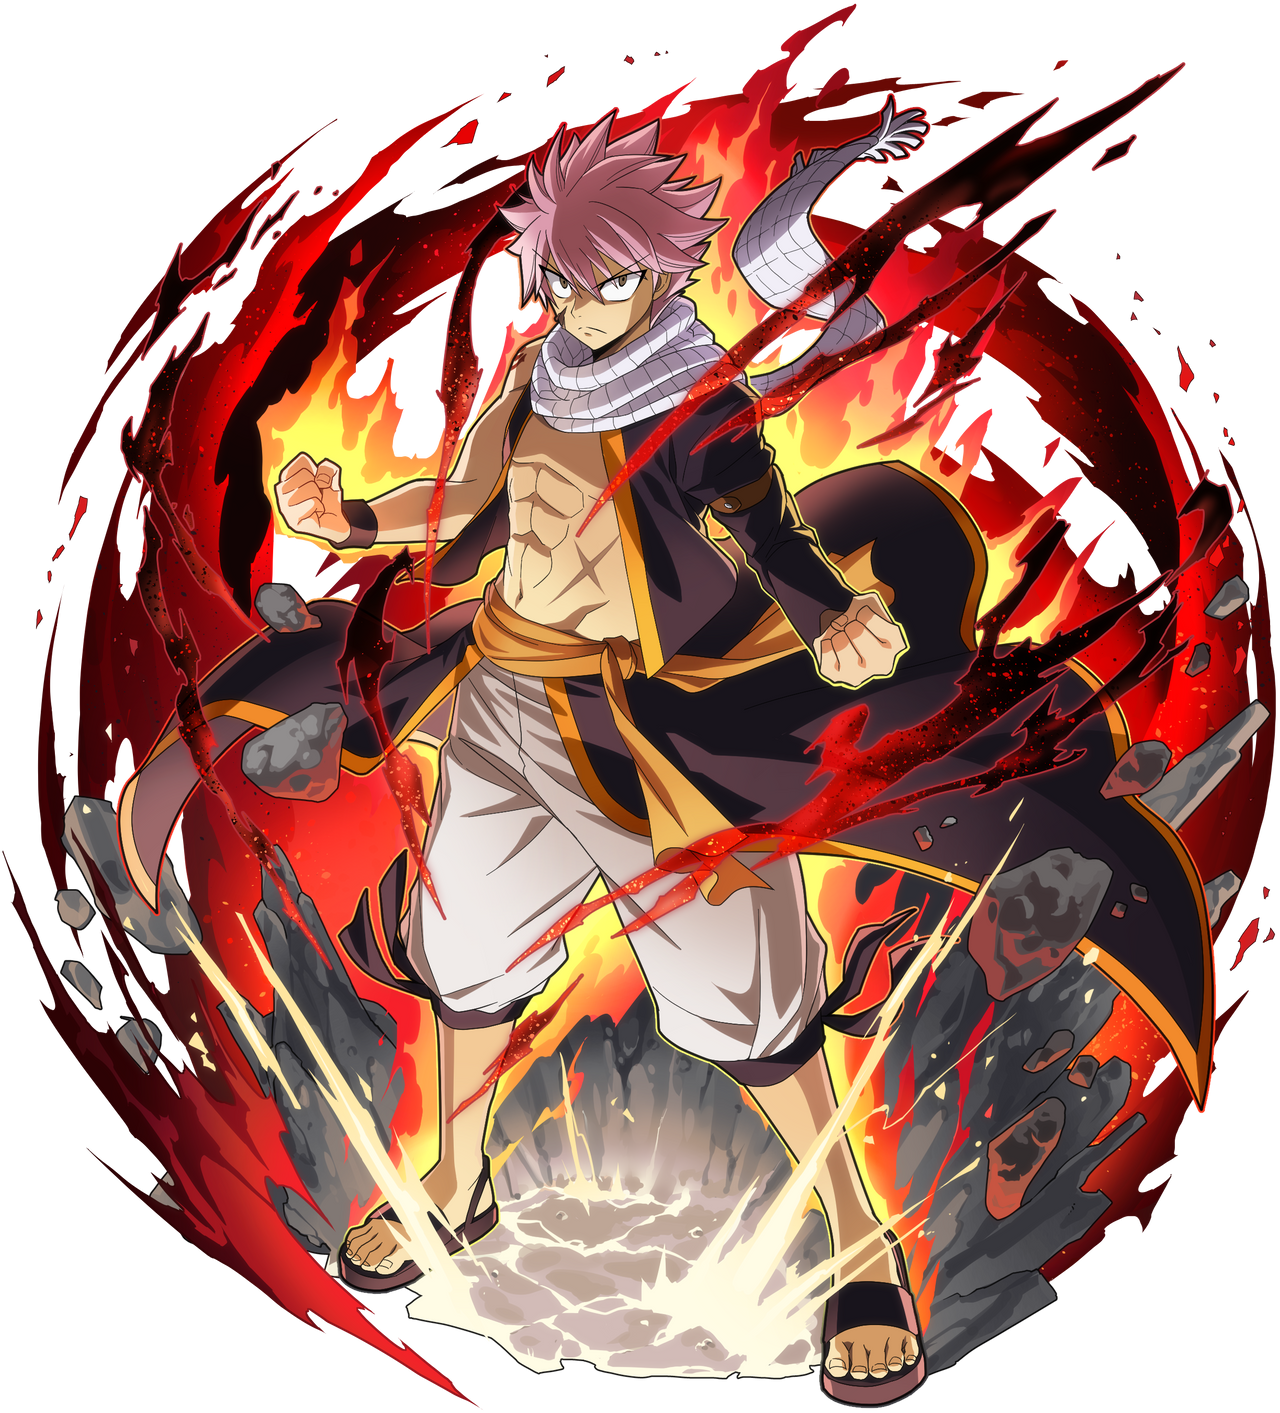 Natsu Dragon Force - Fairy Tail by MarxeDP on DeviantArt